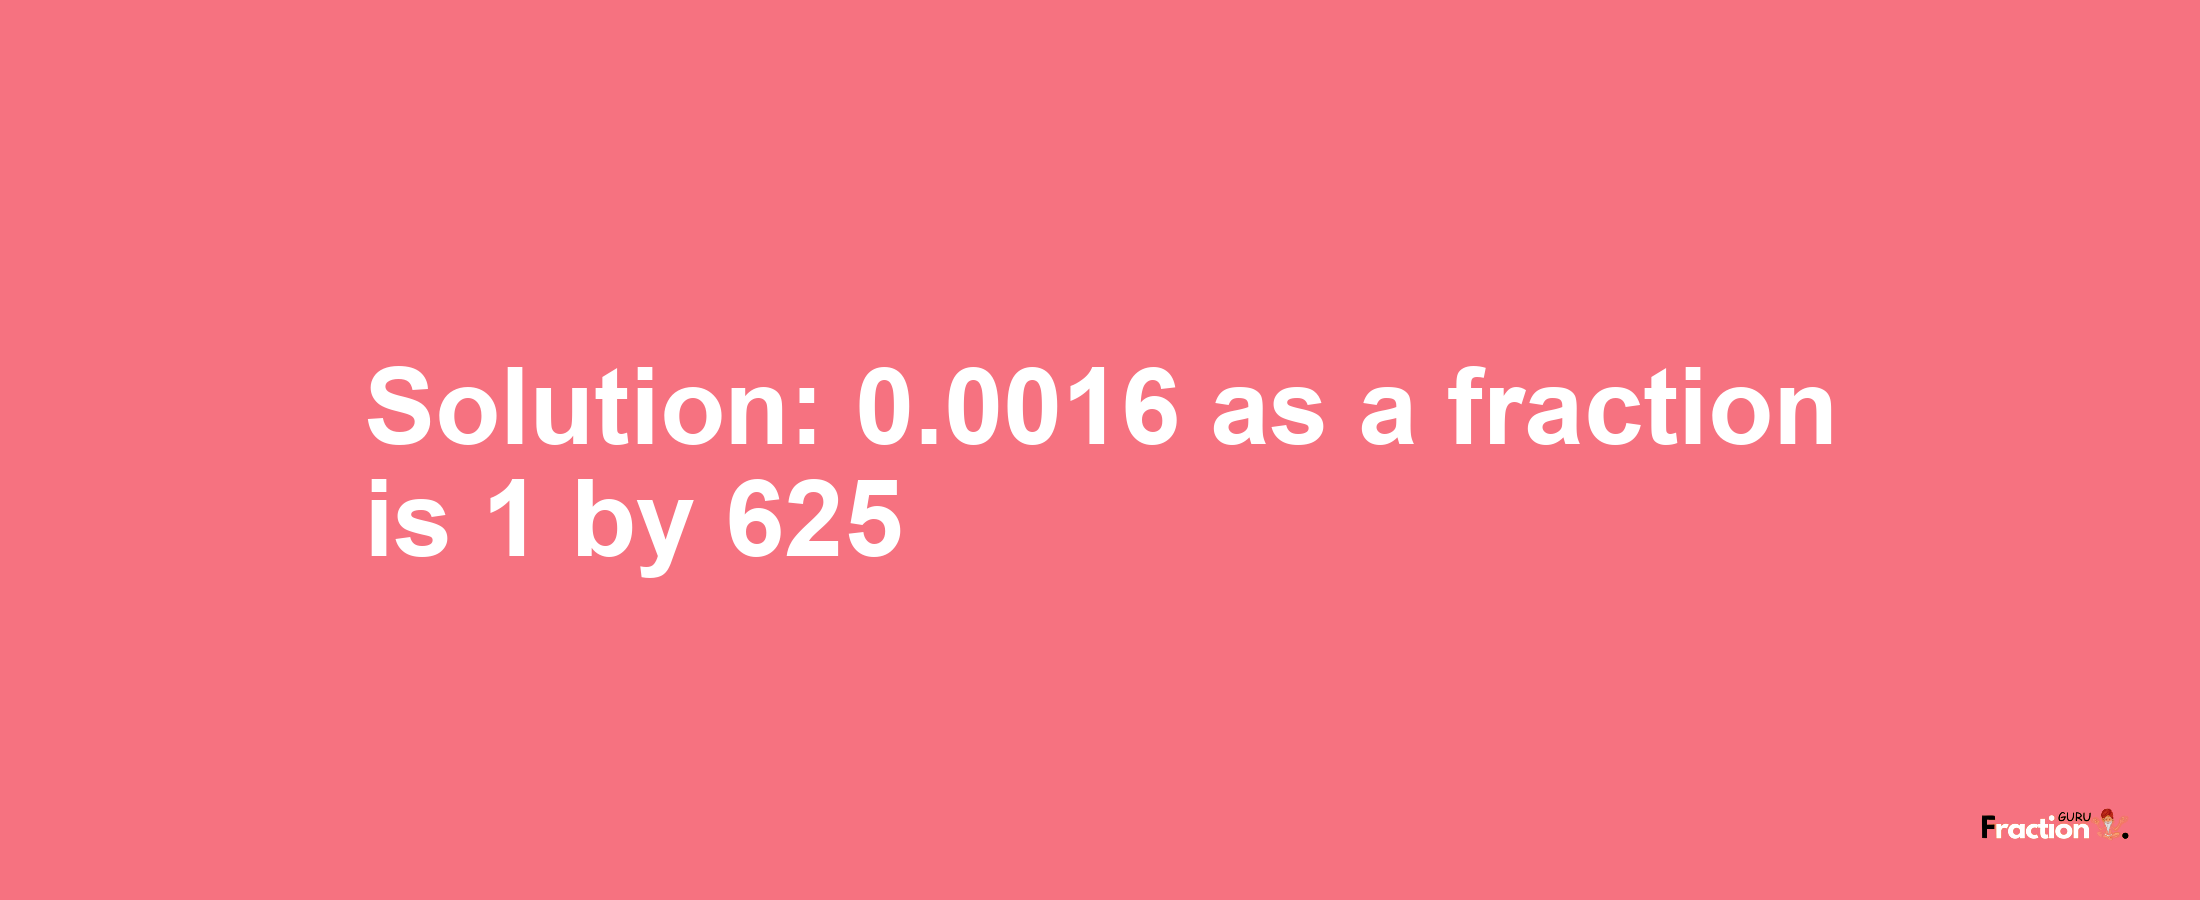 Solution:0.0016 as a fraction is 1/625